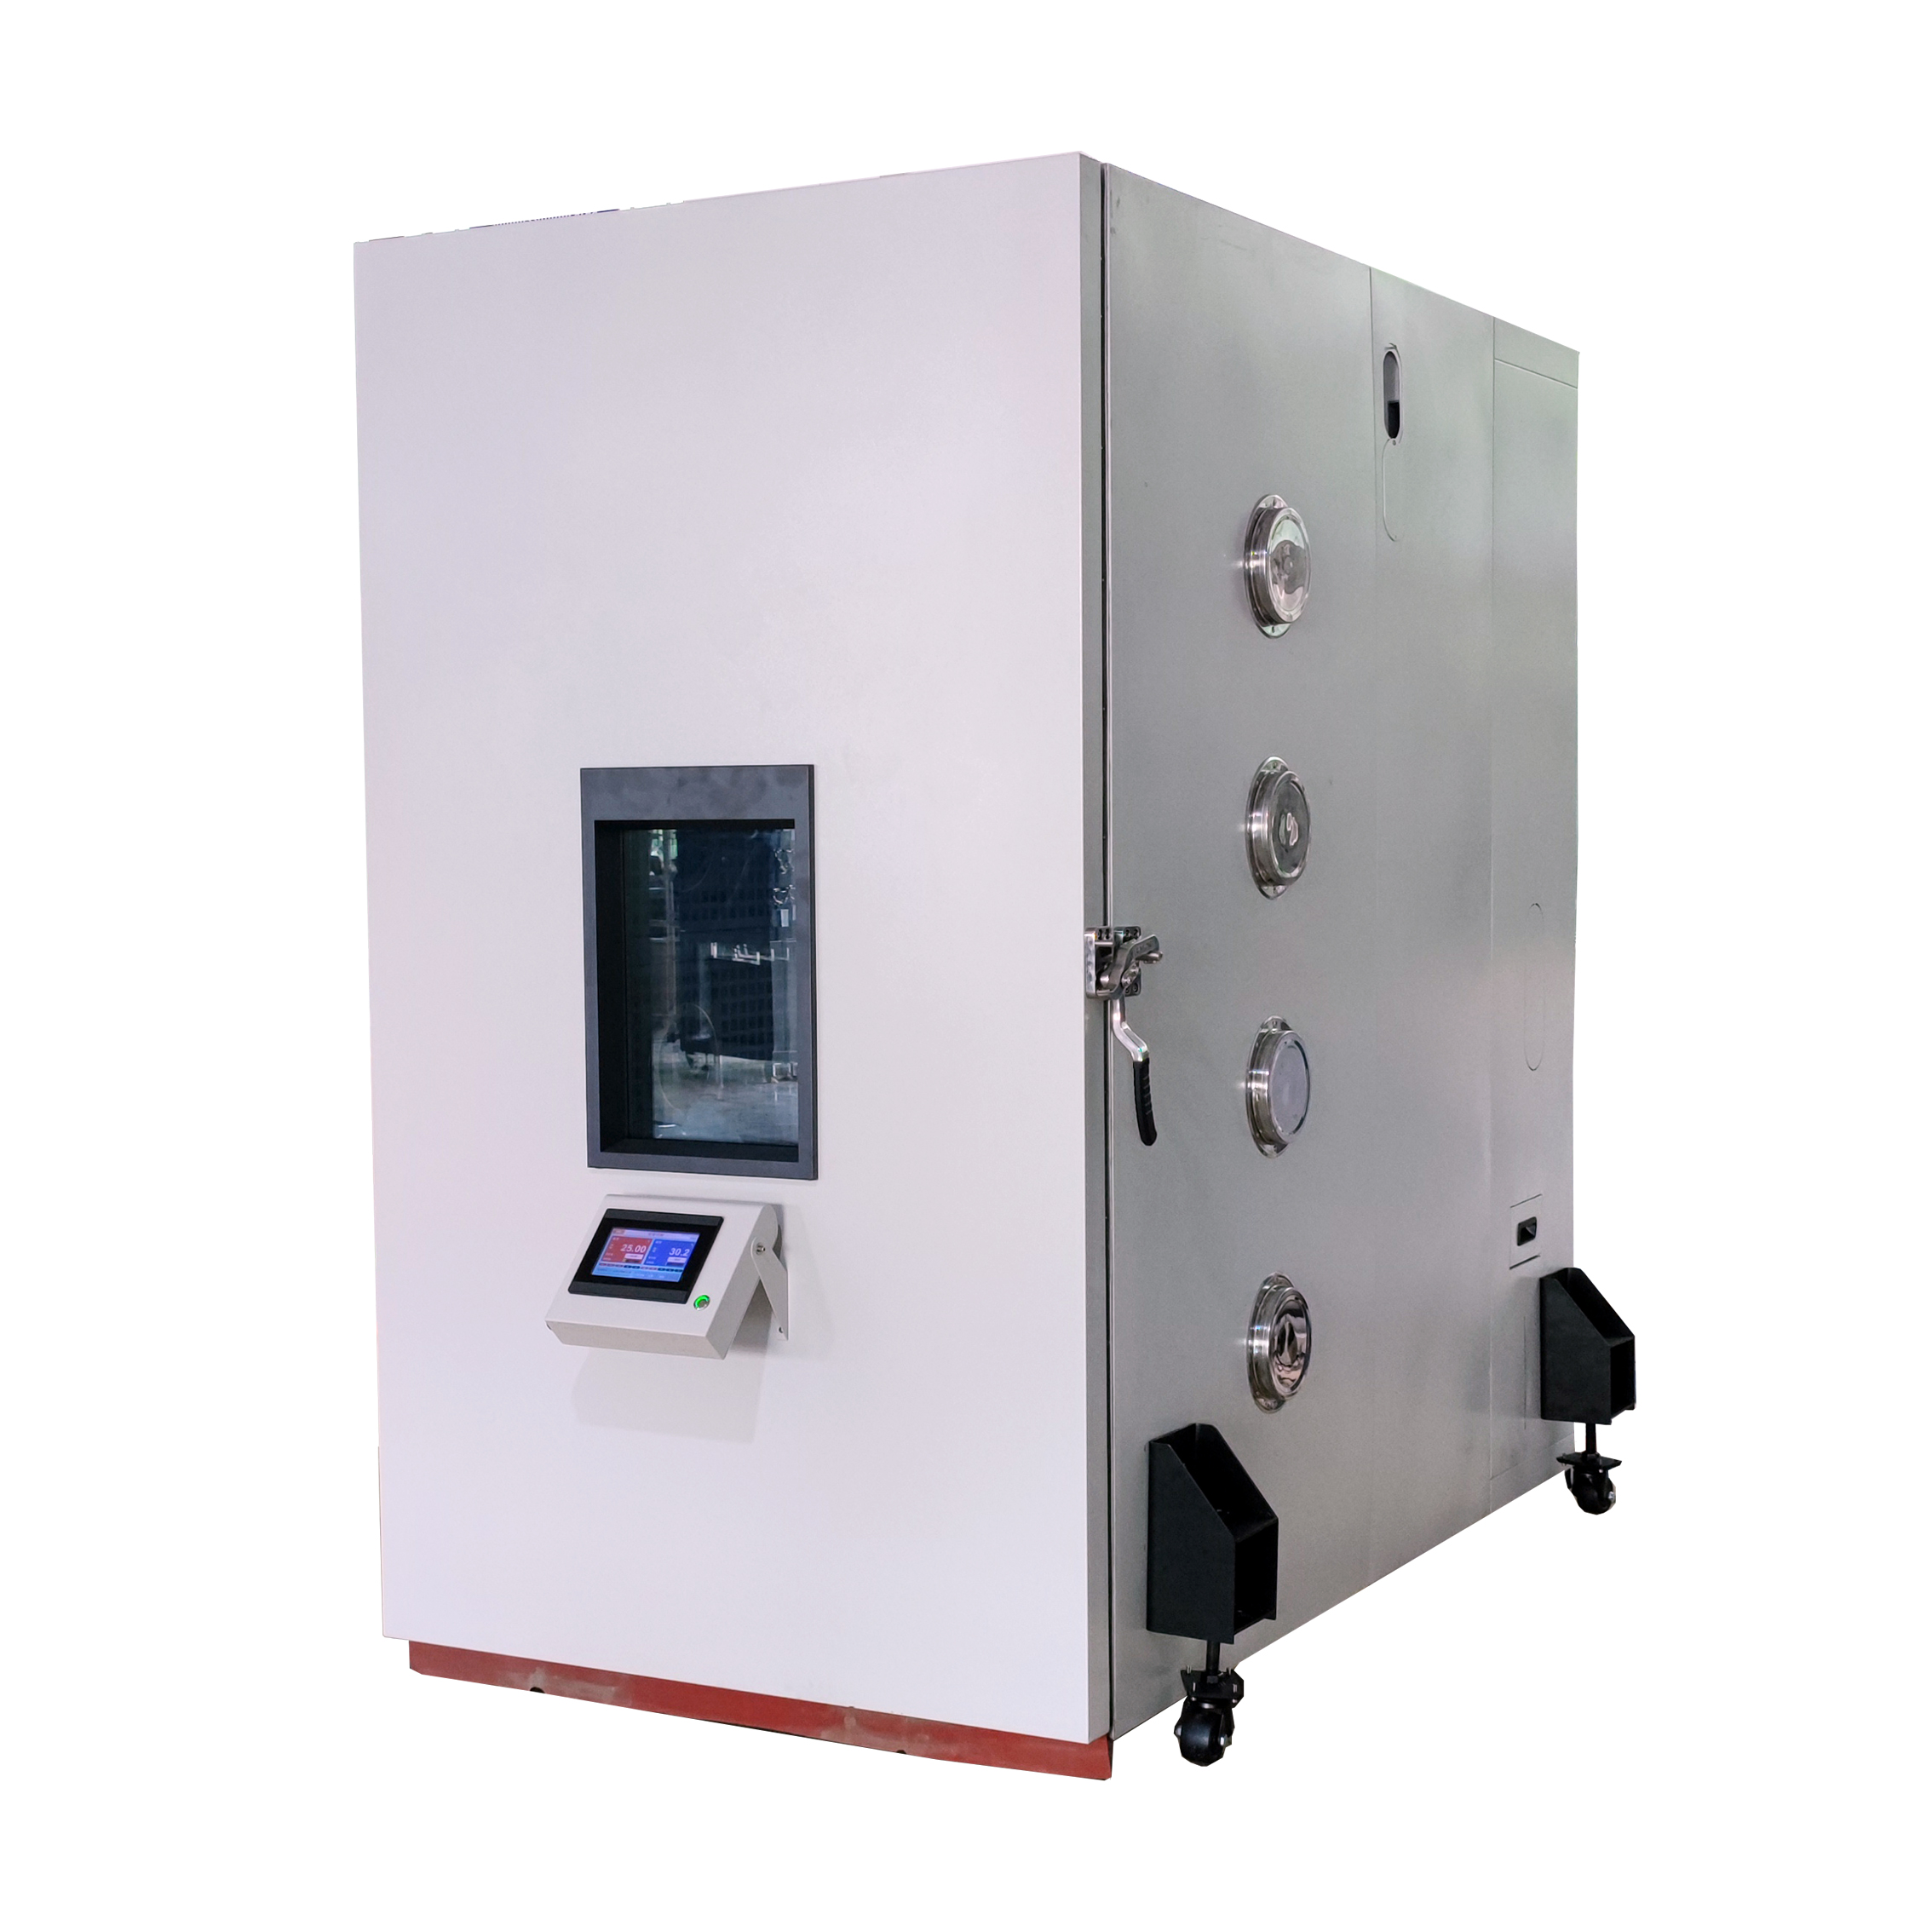 Reliable and Accurate Hardness Tester for Industrial Use